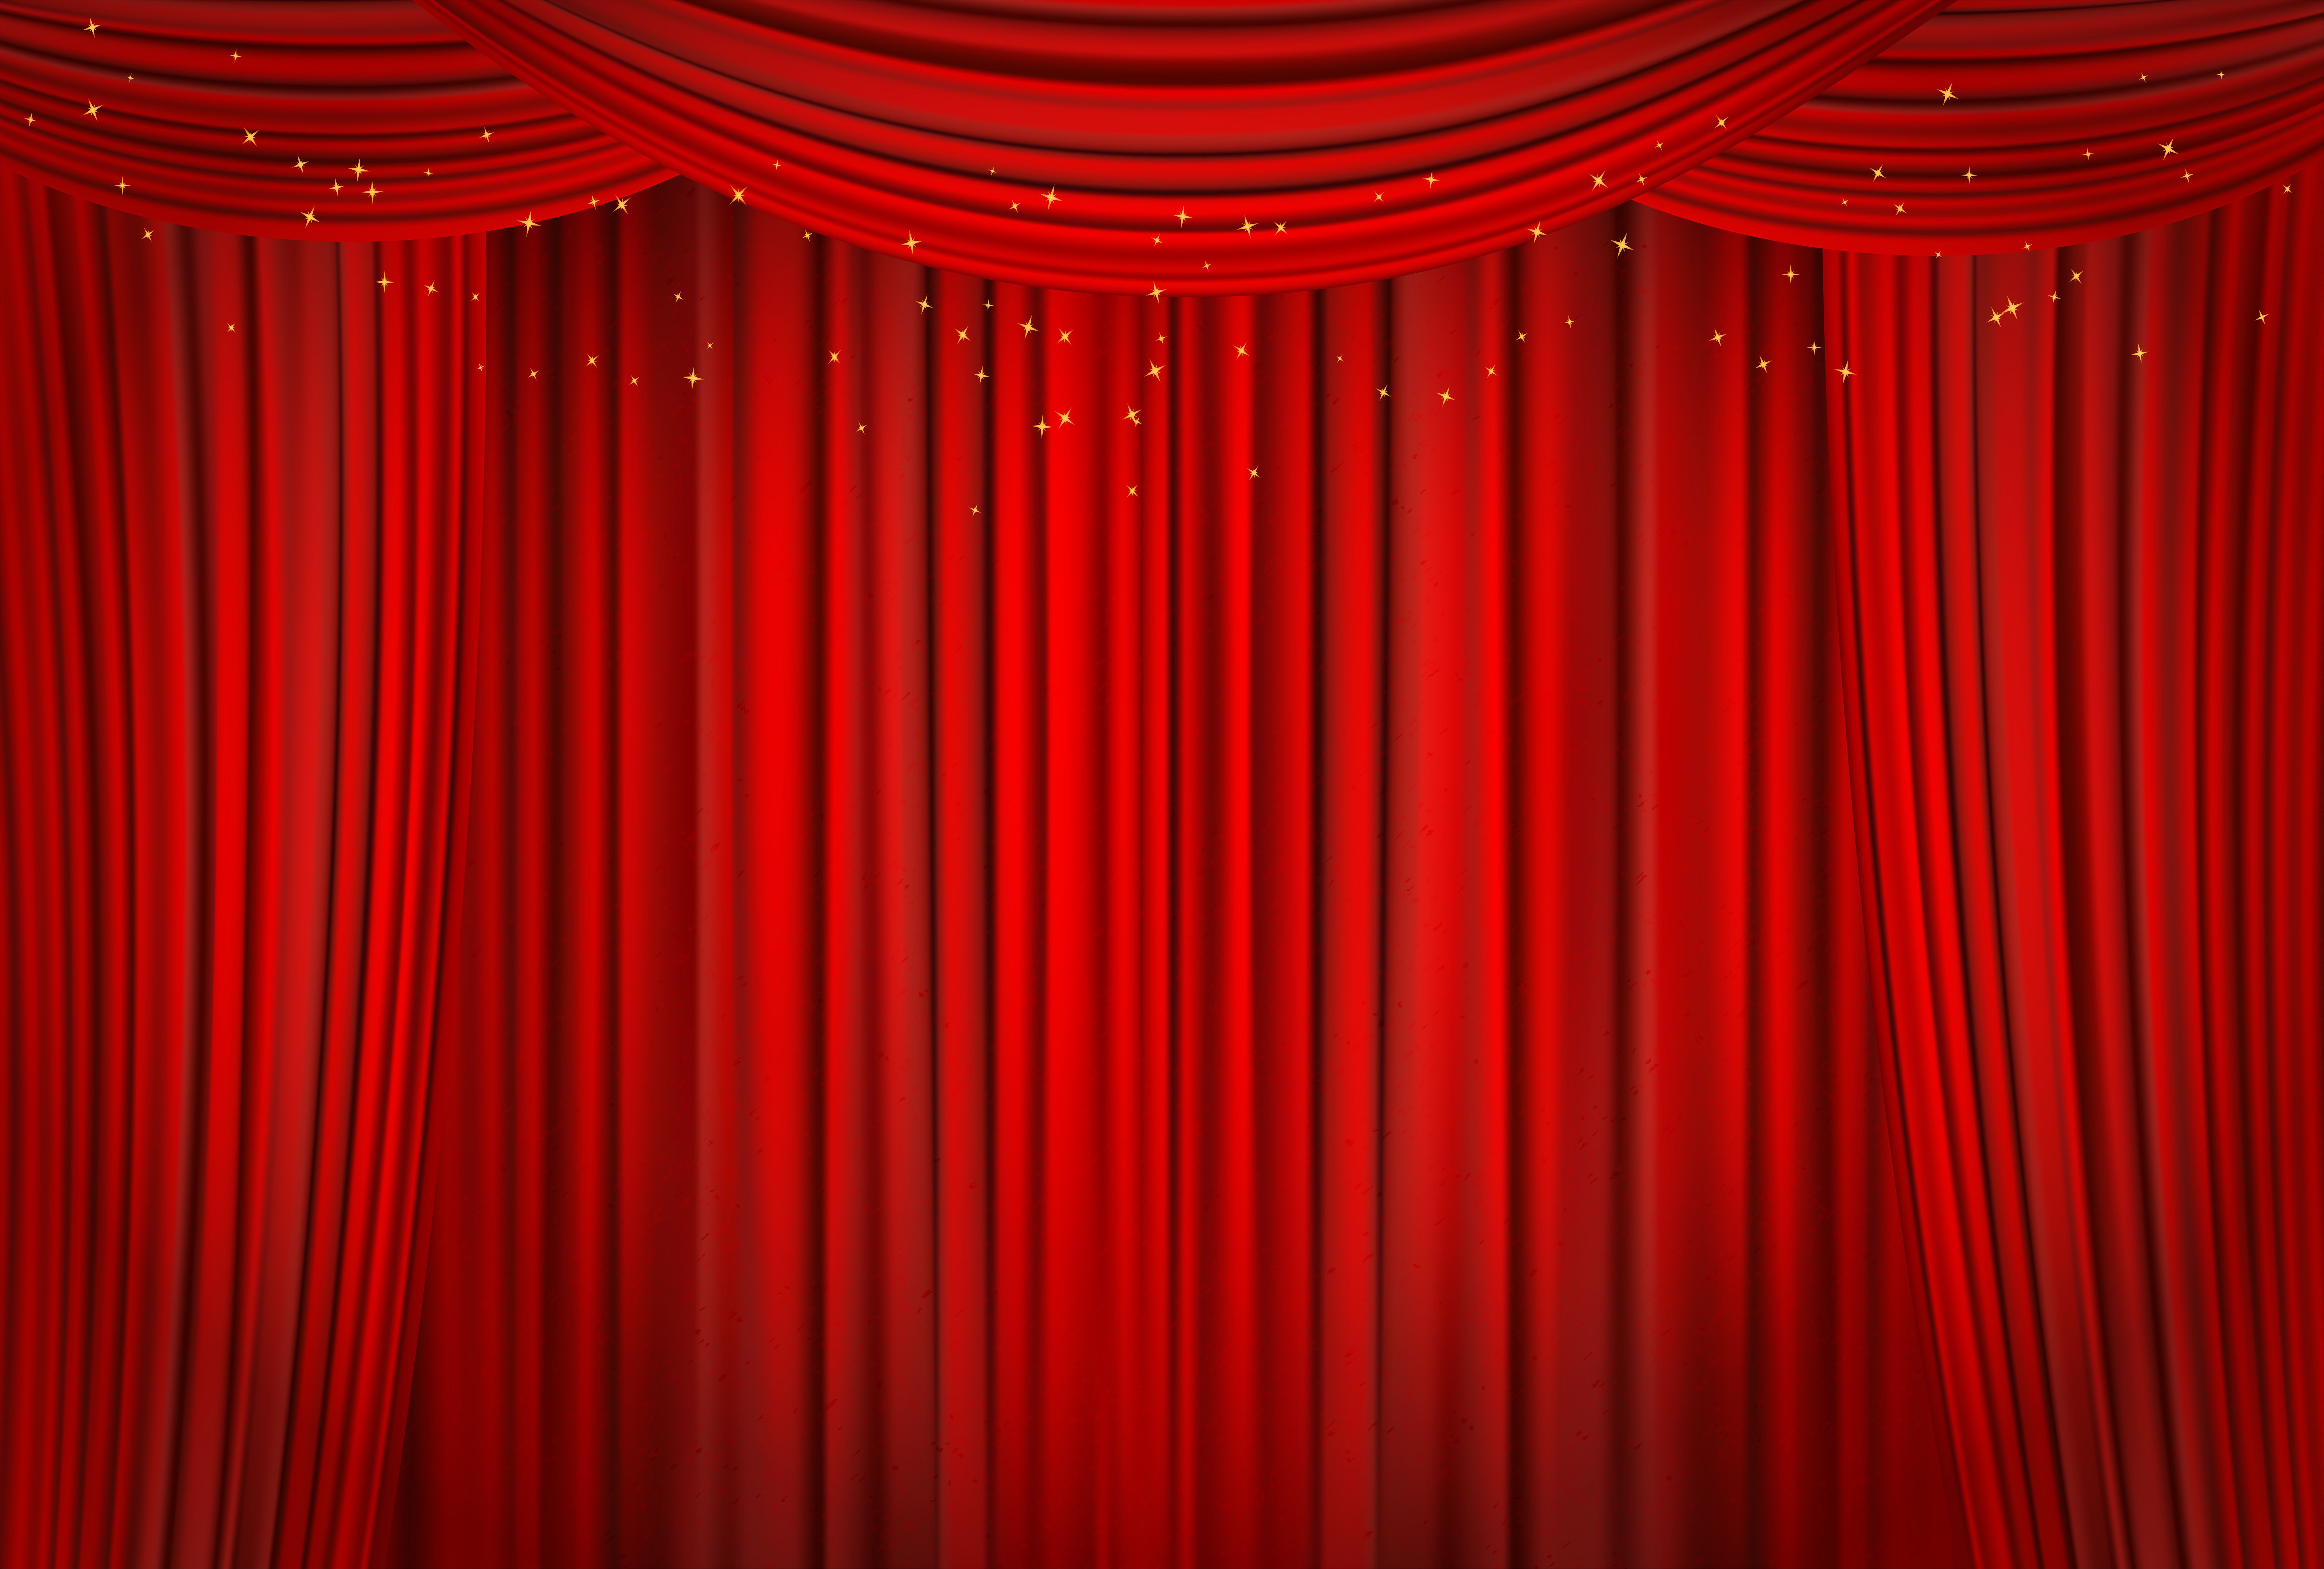 Curtains Red Background Quality Image And Transparent PNG Free Clipart